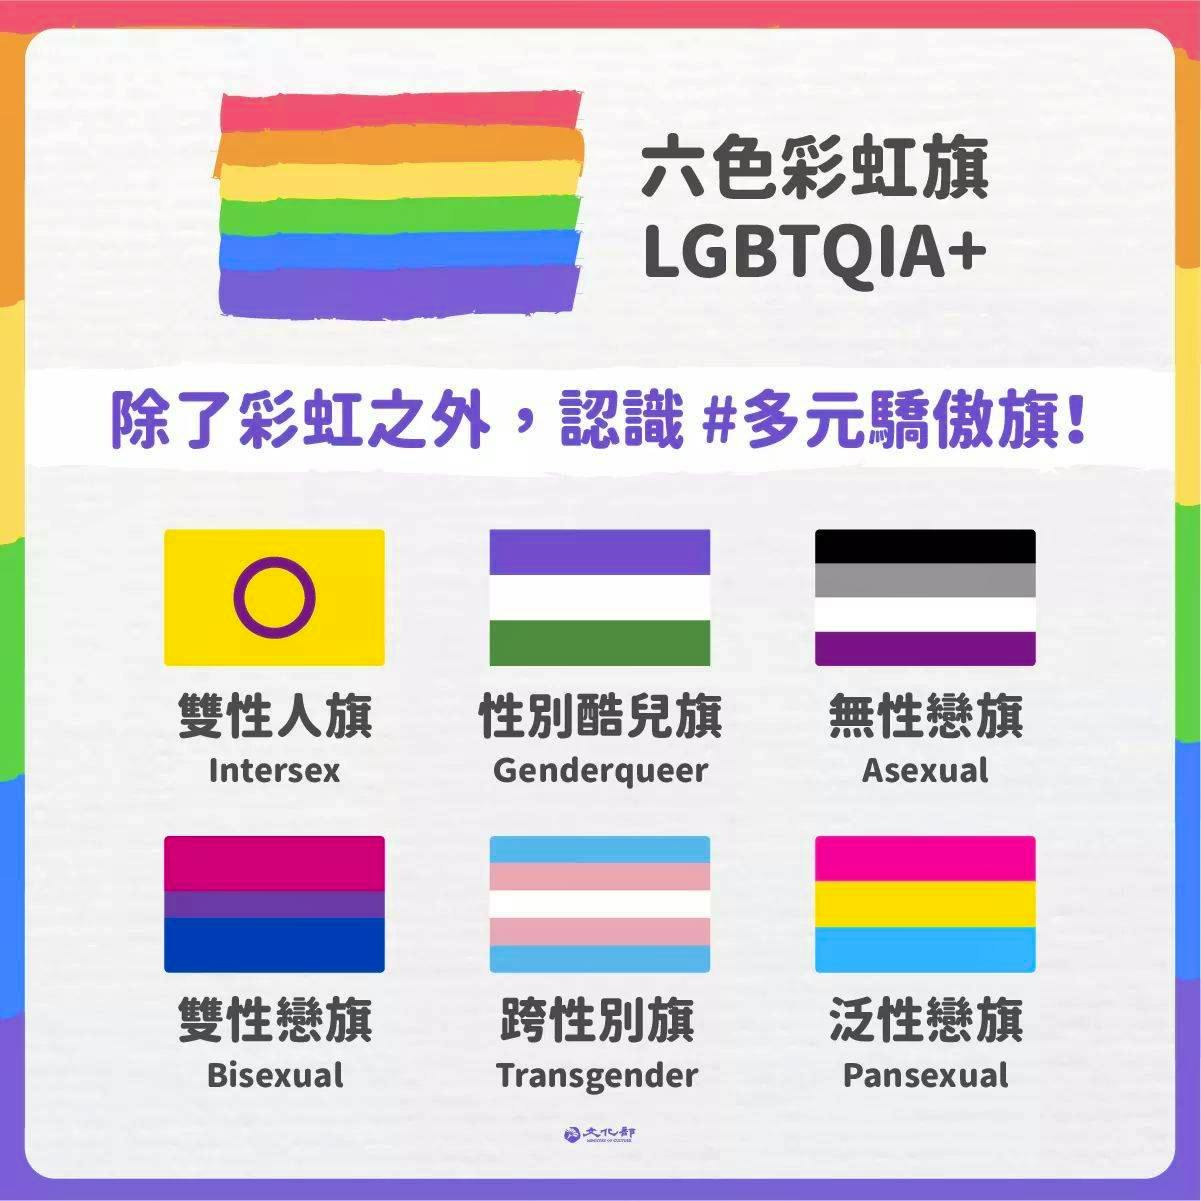 LGBT in Chinese - Pride flags